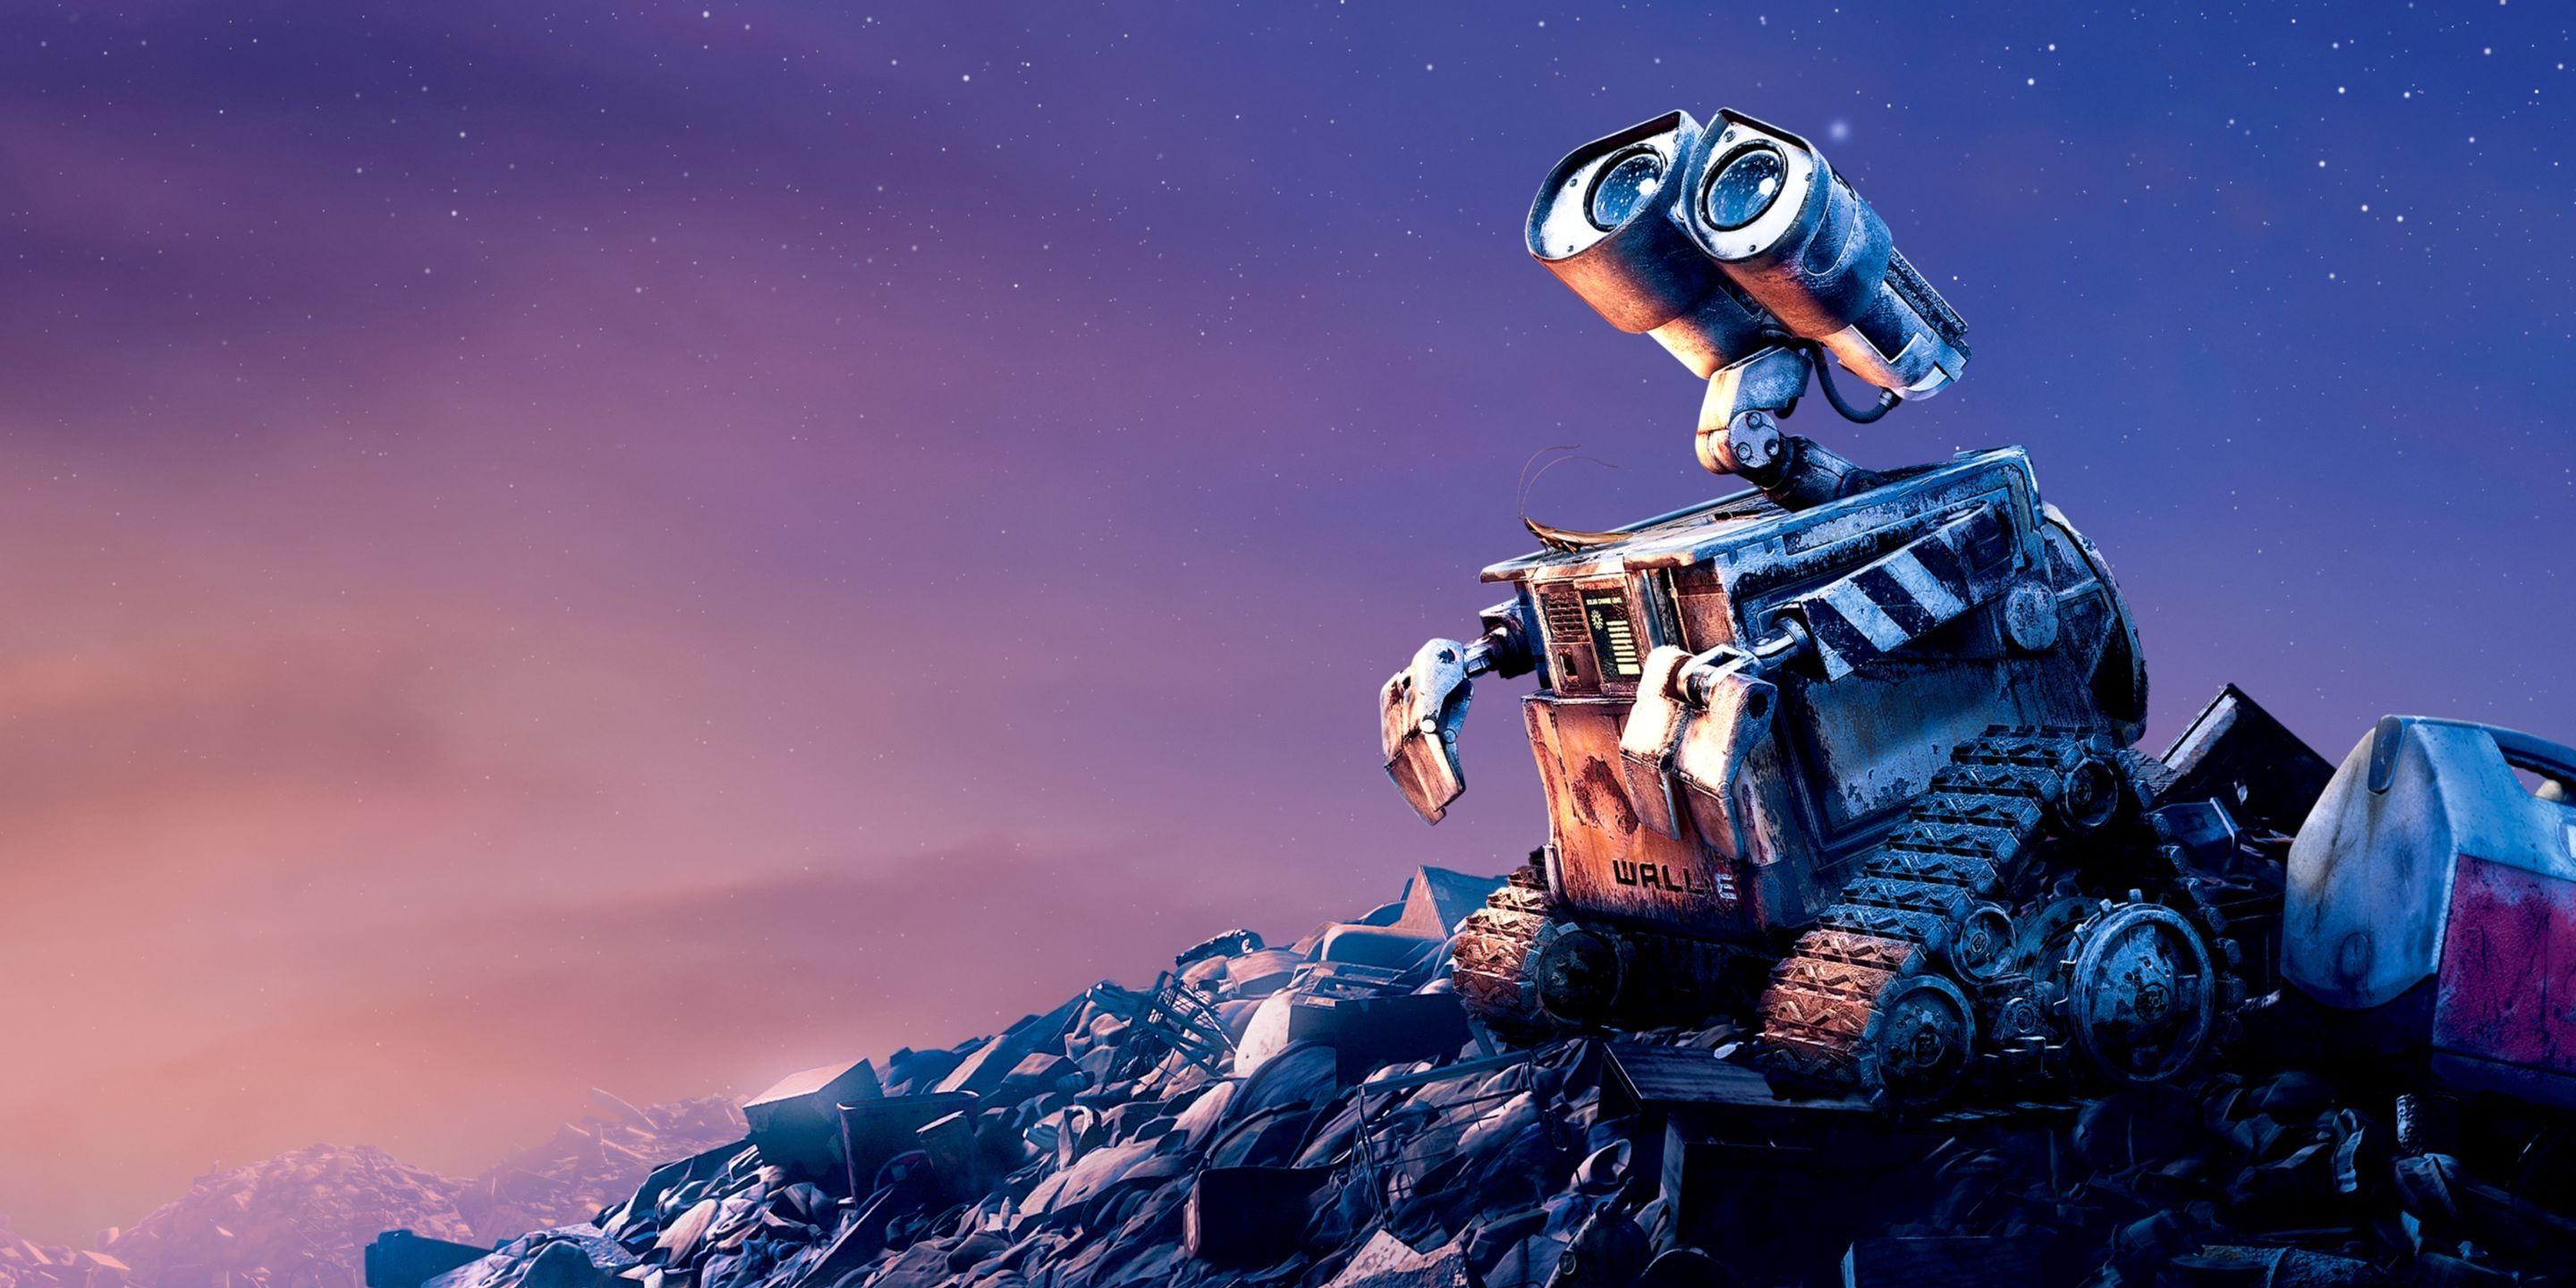 10 Ways That Wall-E Is Scary & Disturbing